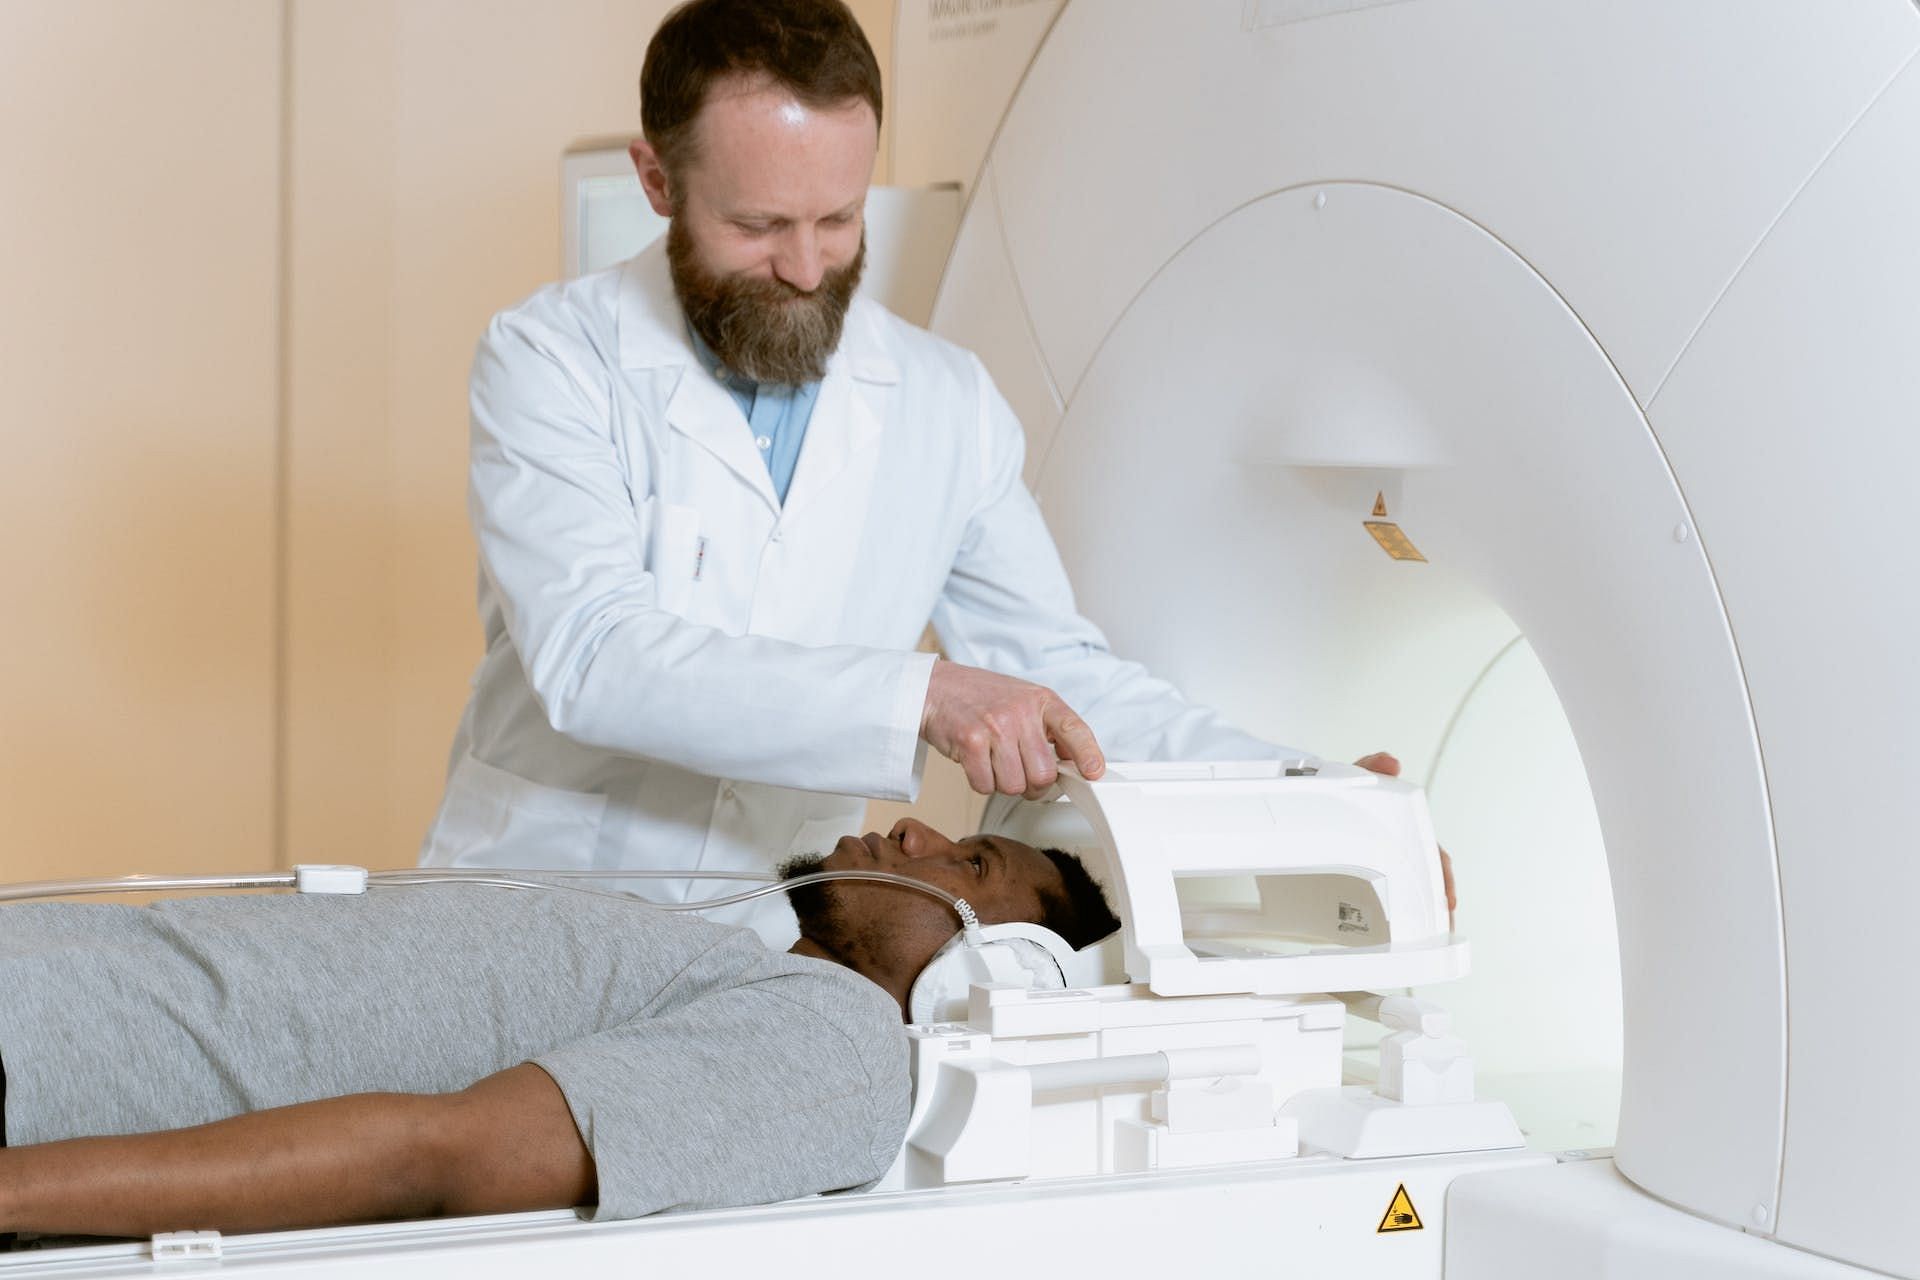 A CT scan may be needed to get a clear picture of the brain. (Image via Pexels/MART PRODUCTION)